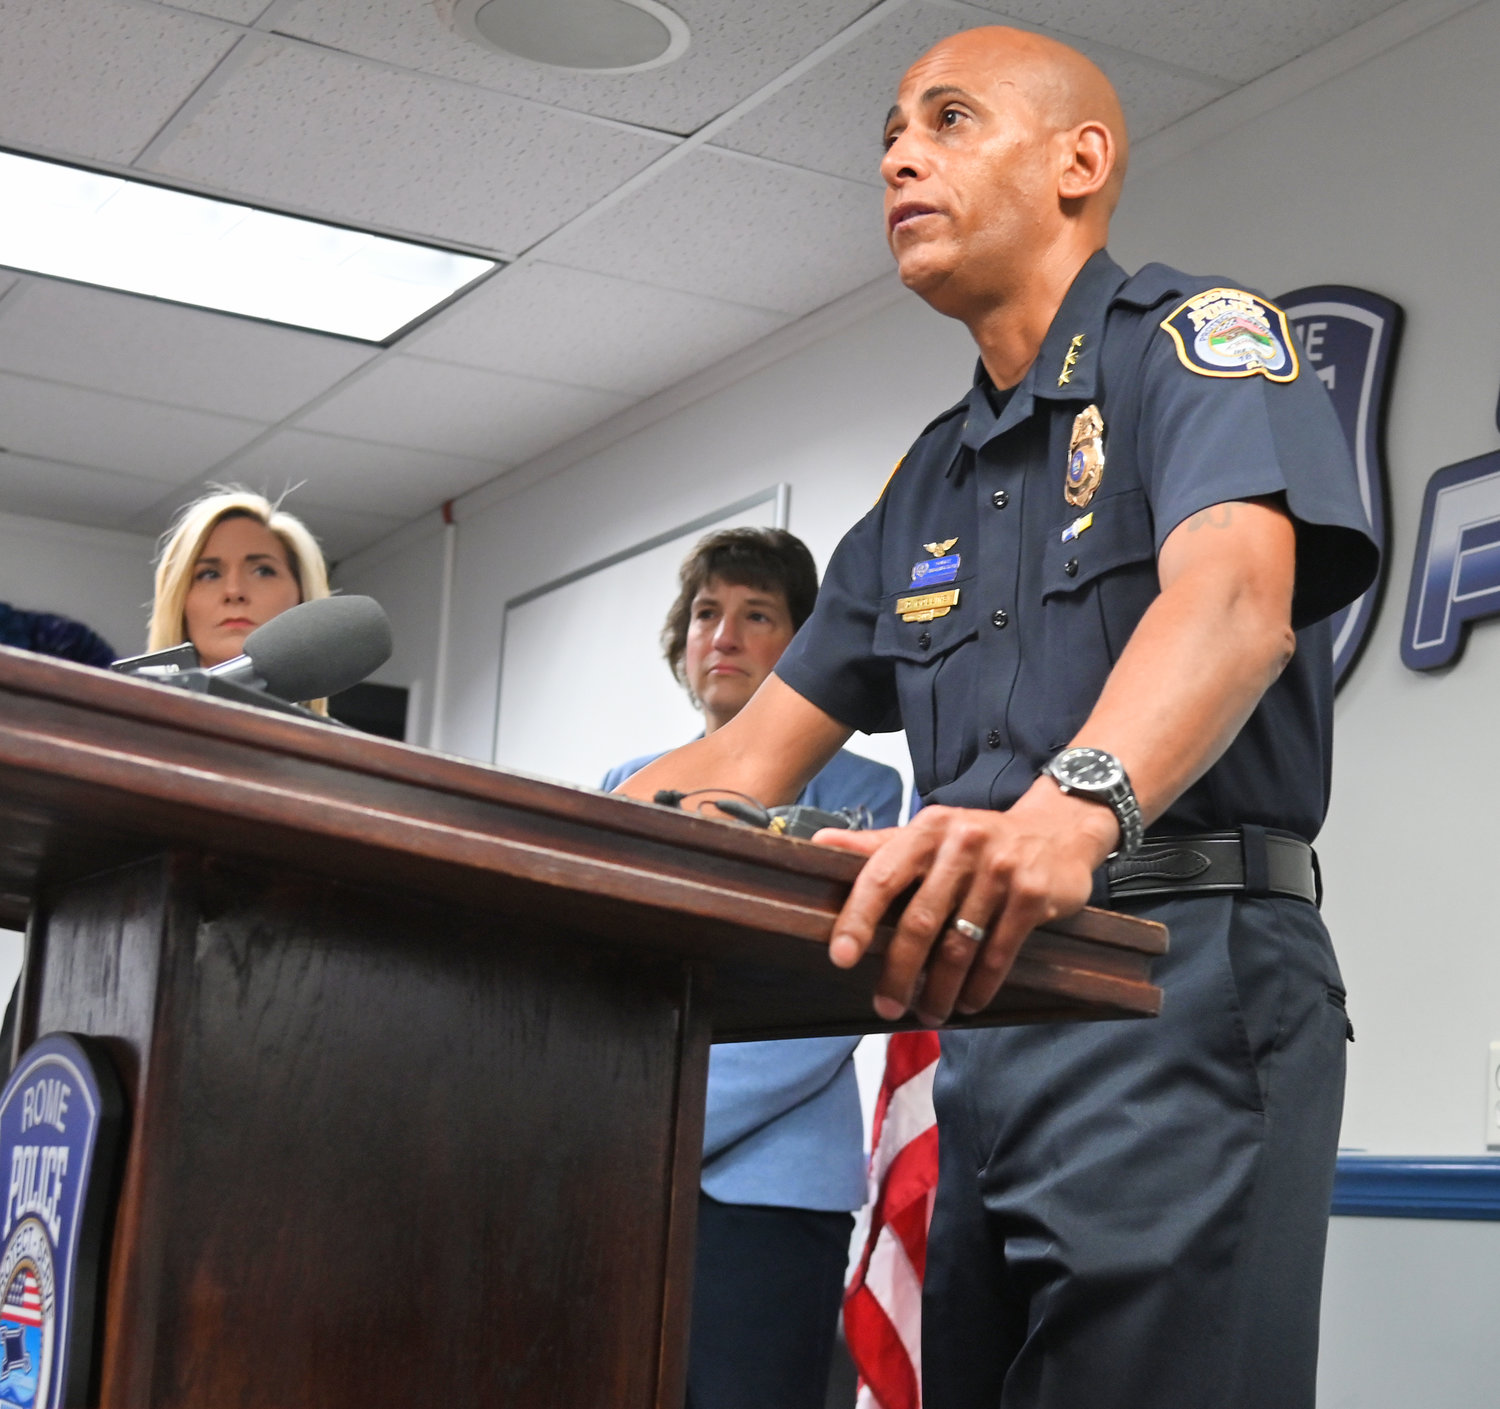 Rome Police Chief David J. Collins unveiled the department's new Street Crimes Unit on Tuesday. The unit will operate independently from the rest of the Patrol Division to focus their efforts on gun and drug-related crimes in Rome. He was joined by Lt. Sharon Rood, left, and Mayor Jacquline M. Izzo, center.